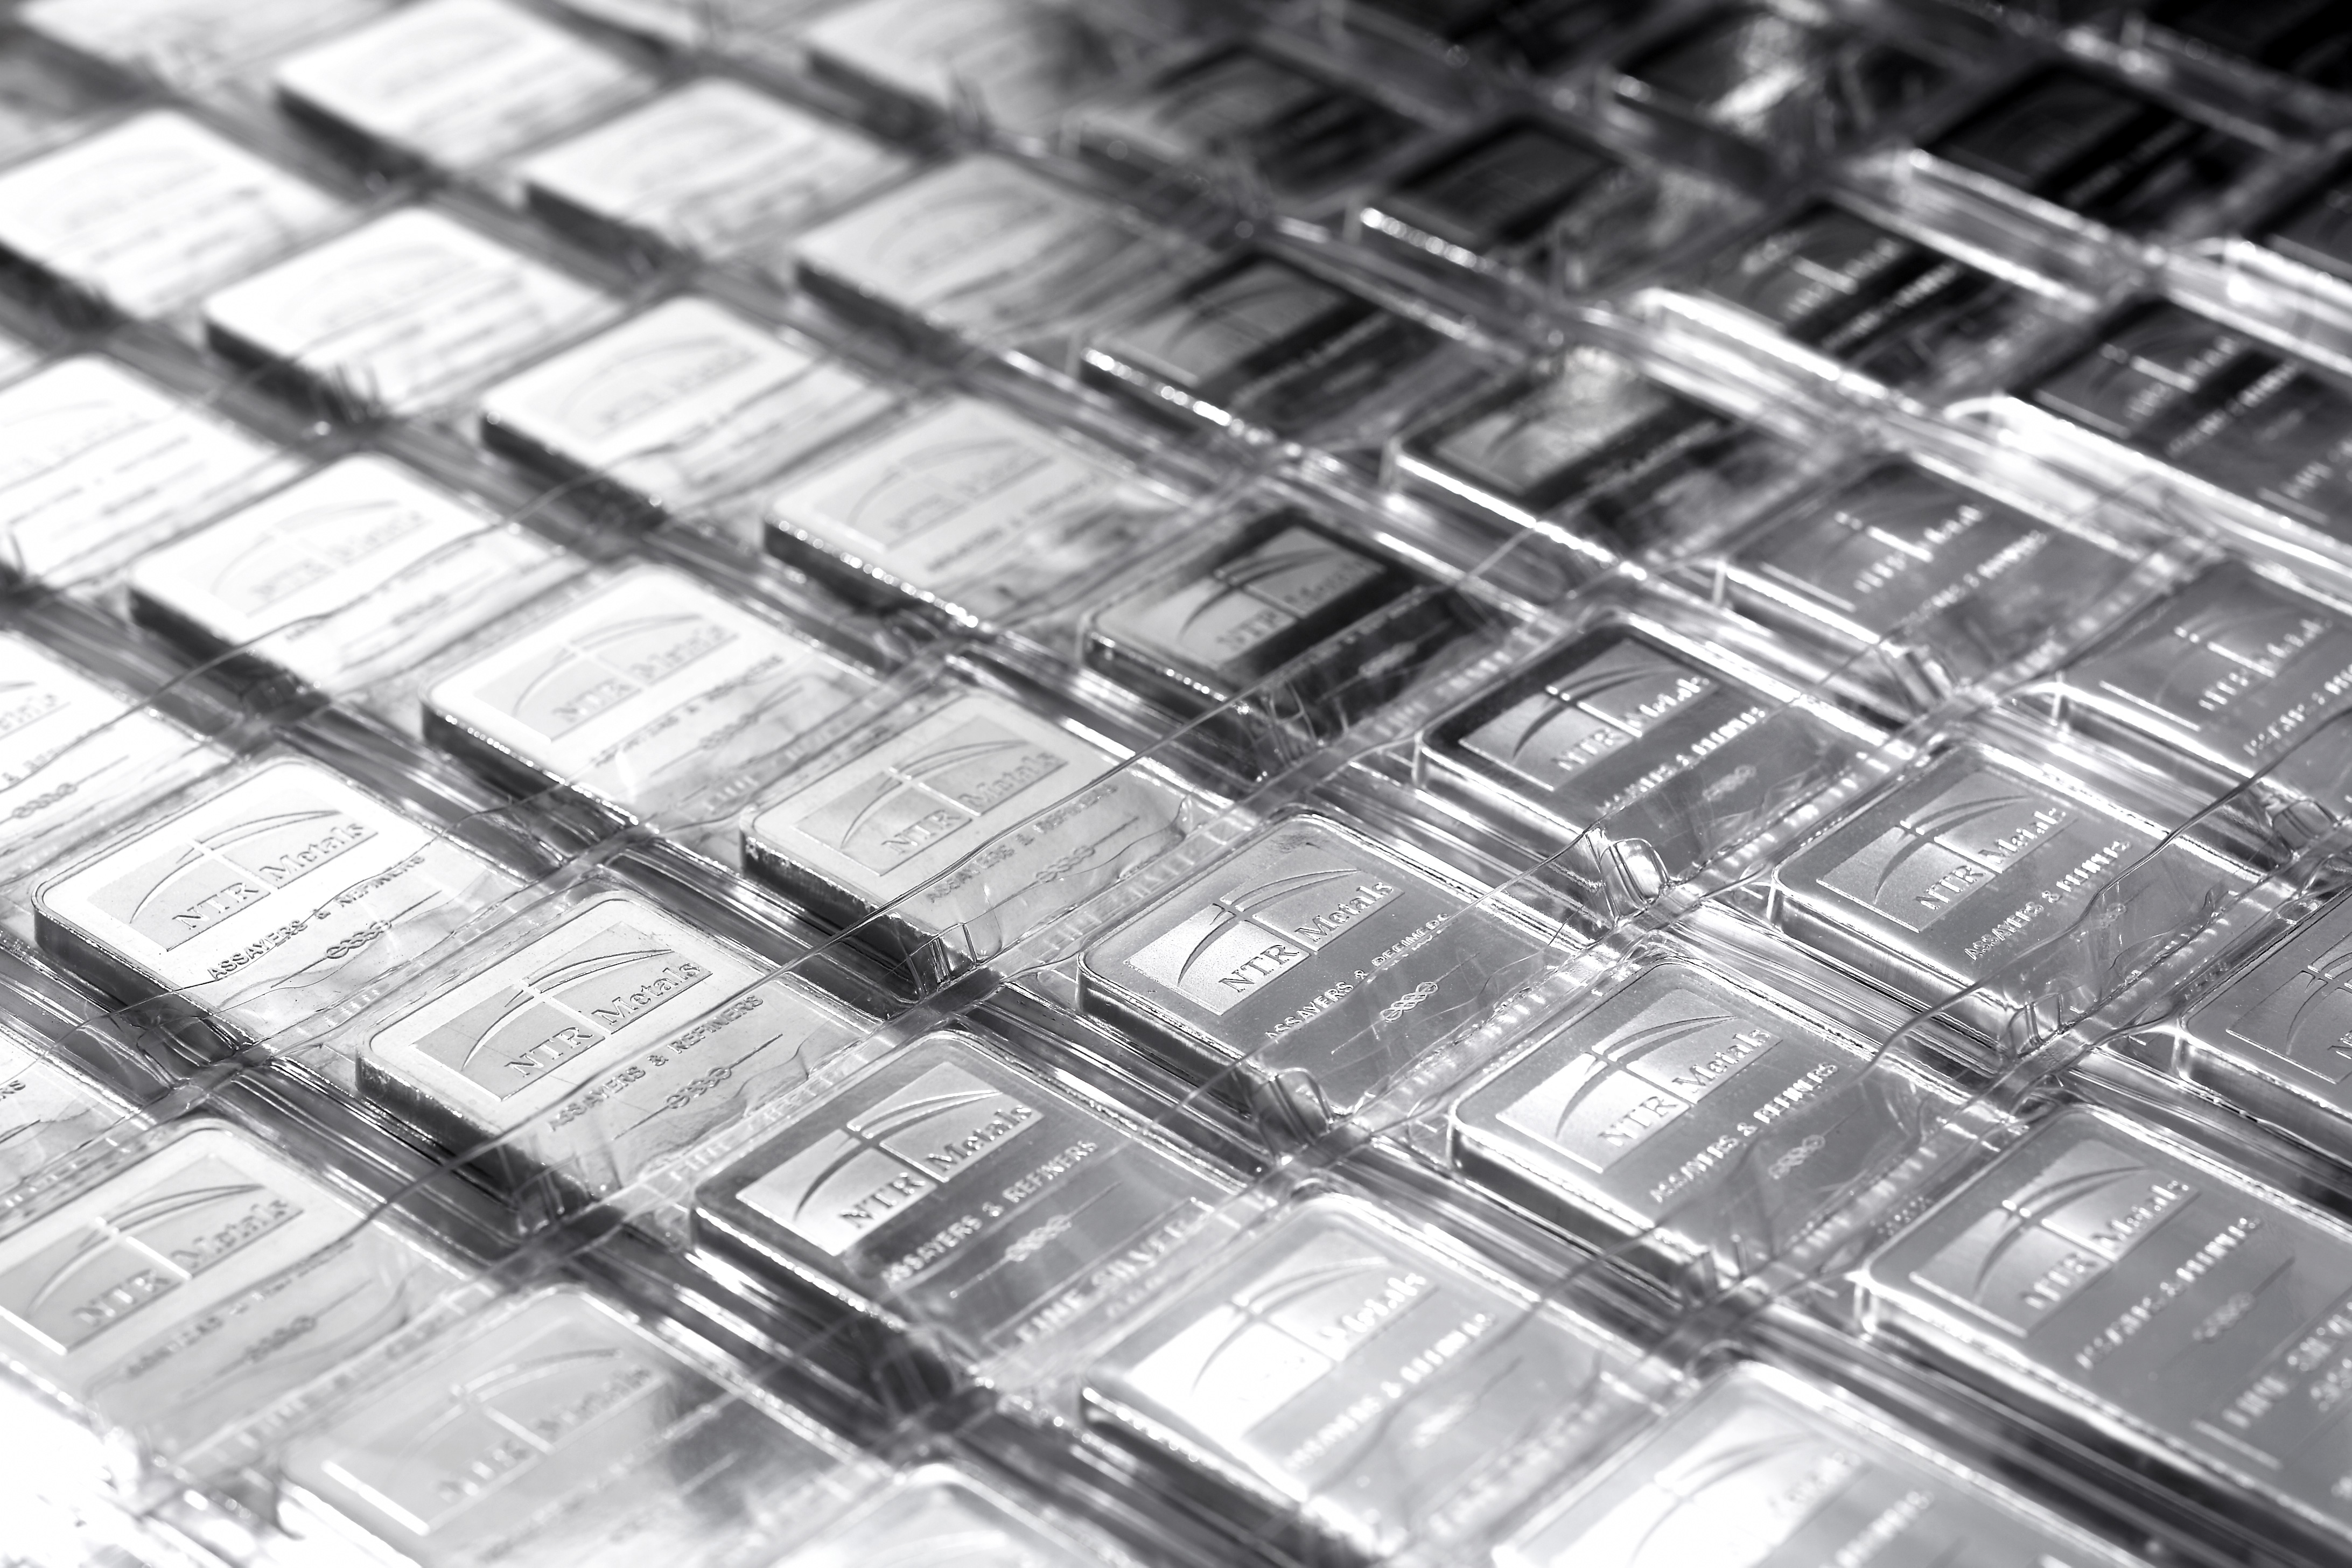 Who Are the Major Producers and Consumers of Silver?